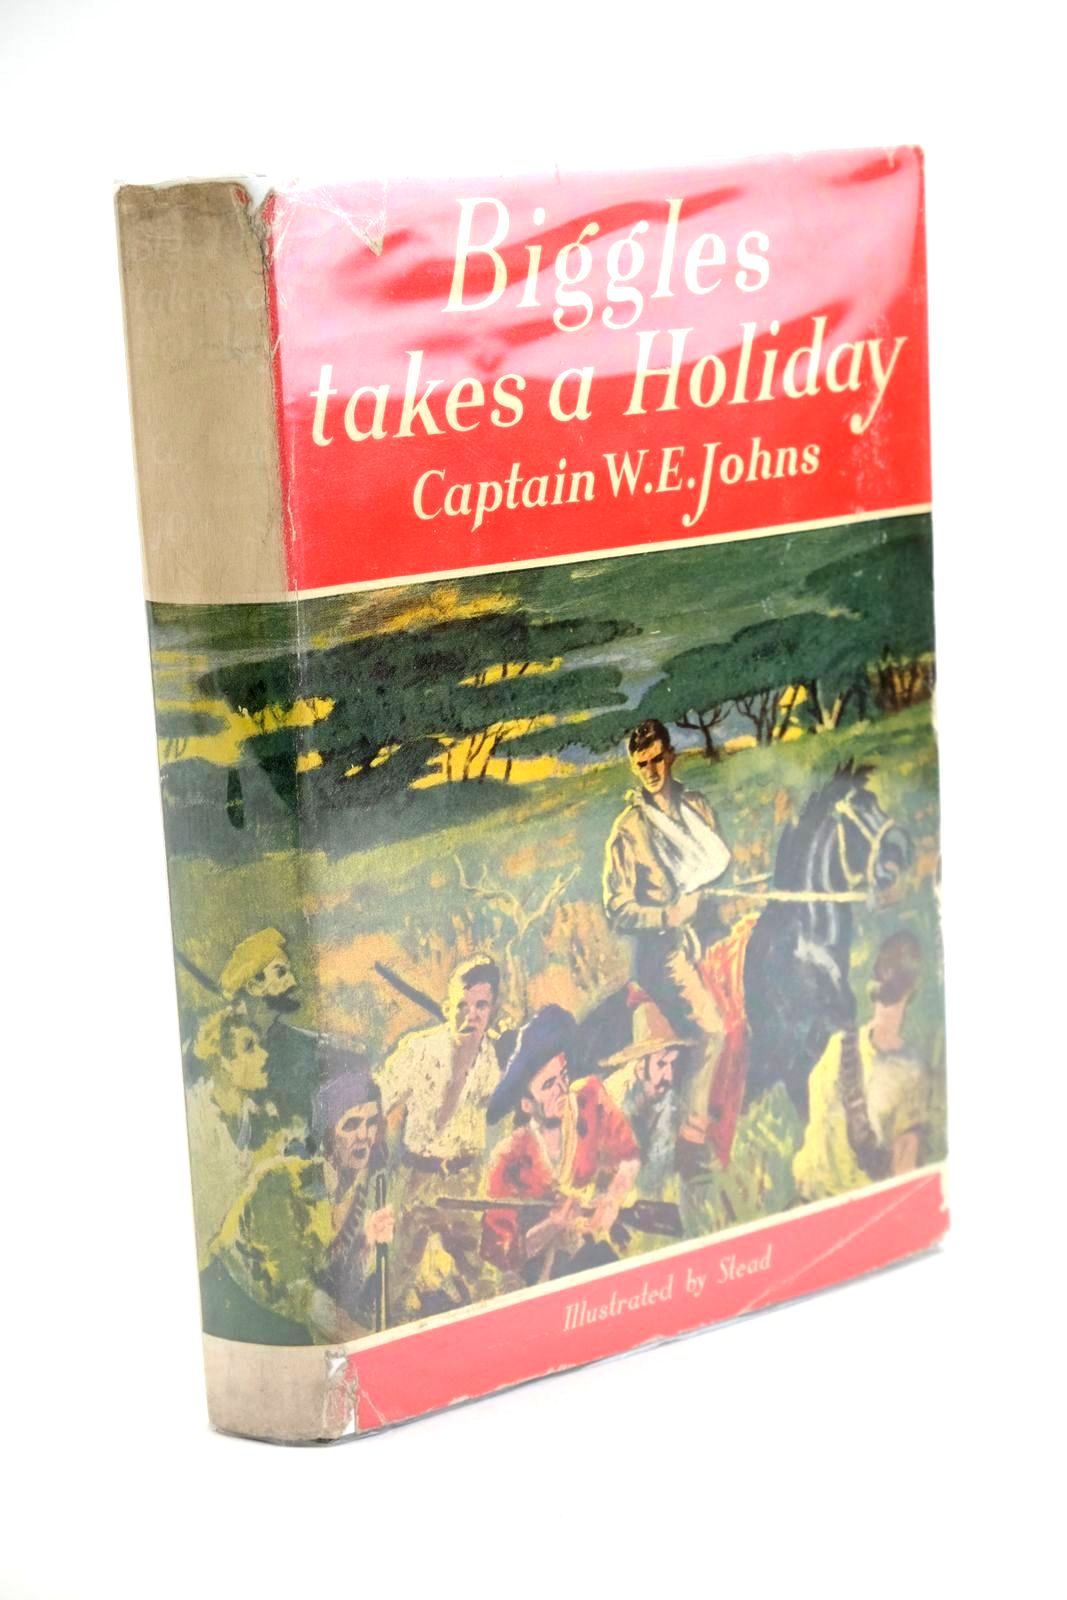 Photo of BIGGLES TAKES A HOLIDAY written by Johns, W.E. illustrated by Stead,  published by Hodder & Stoughton (STOCK CODE: 1323319)  for sale by Stella & Rose's Books